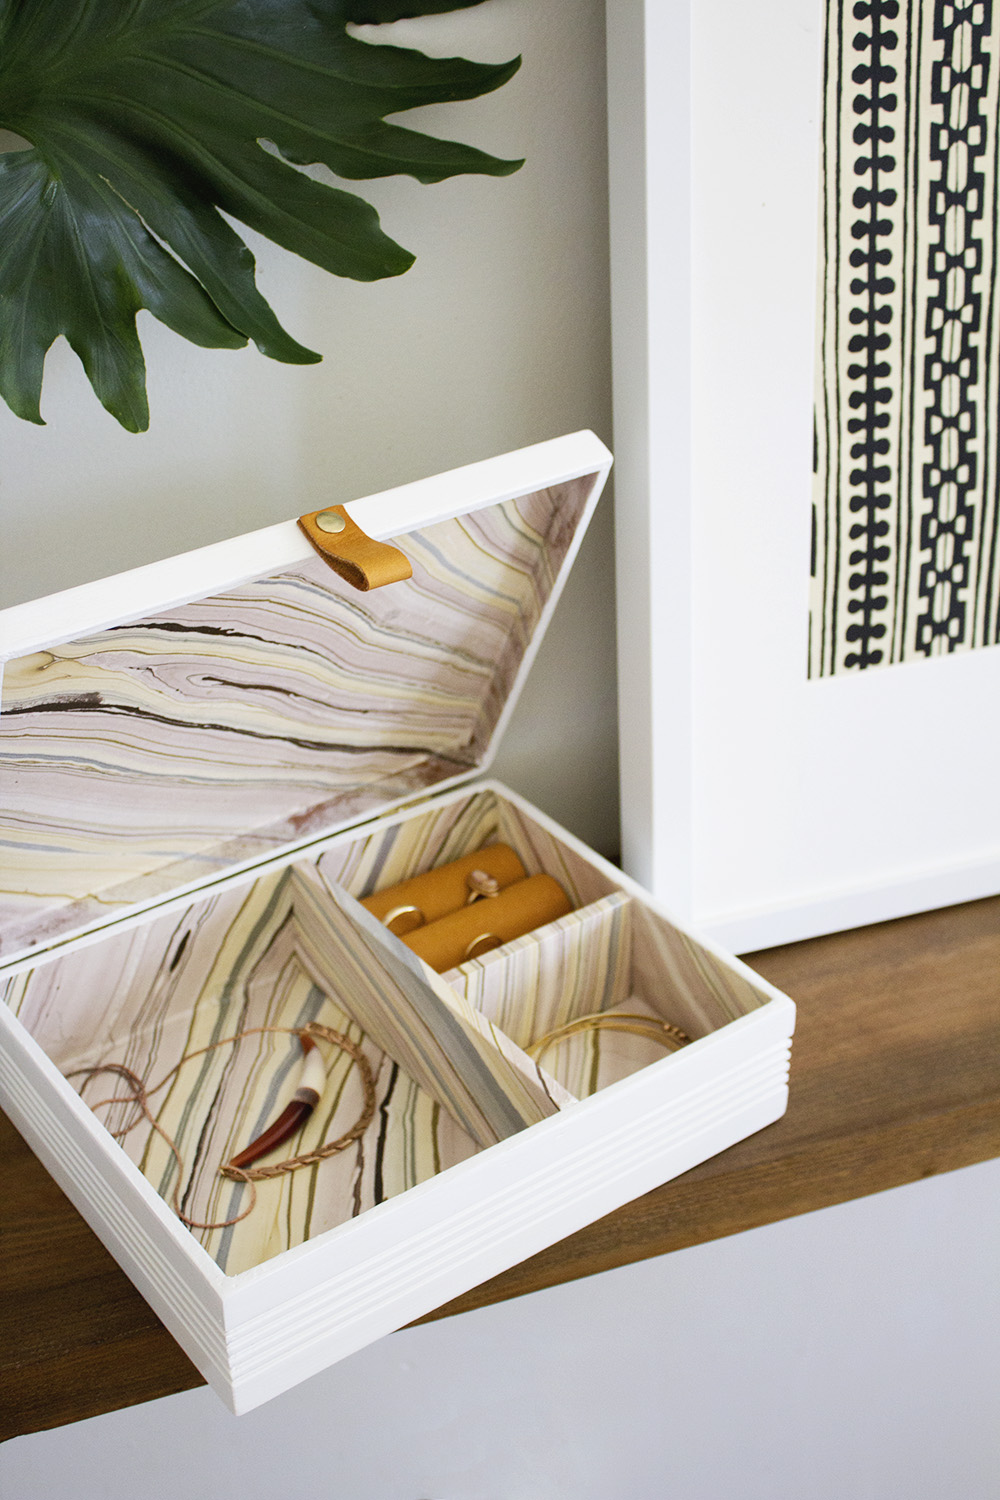 How to Make a Jewelry Box From A Cigar Box